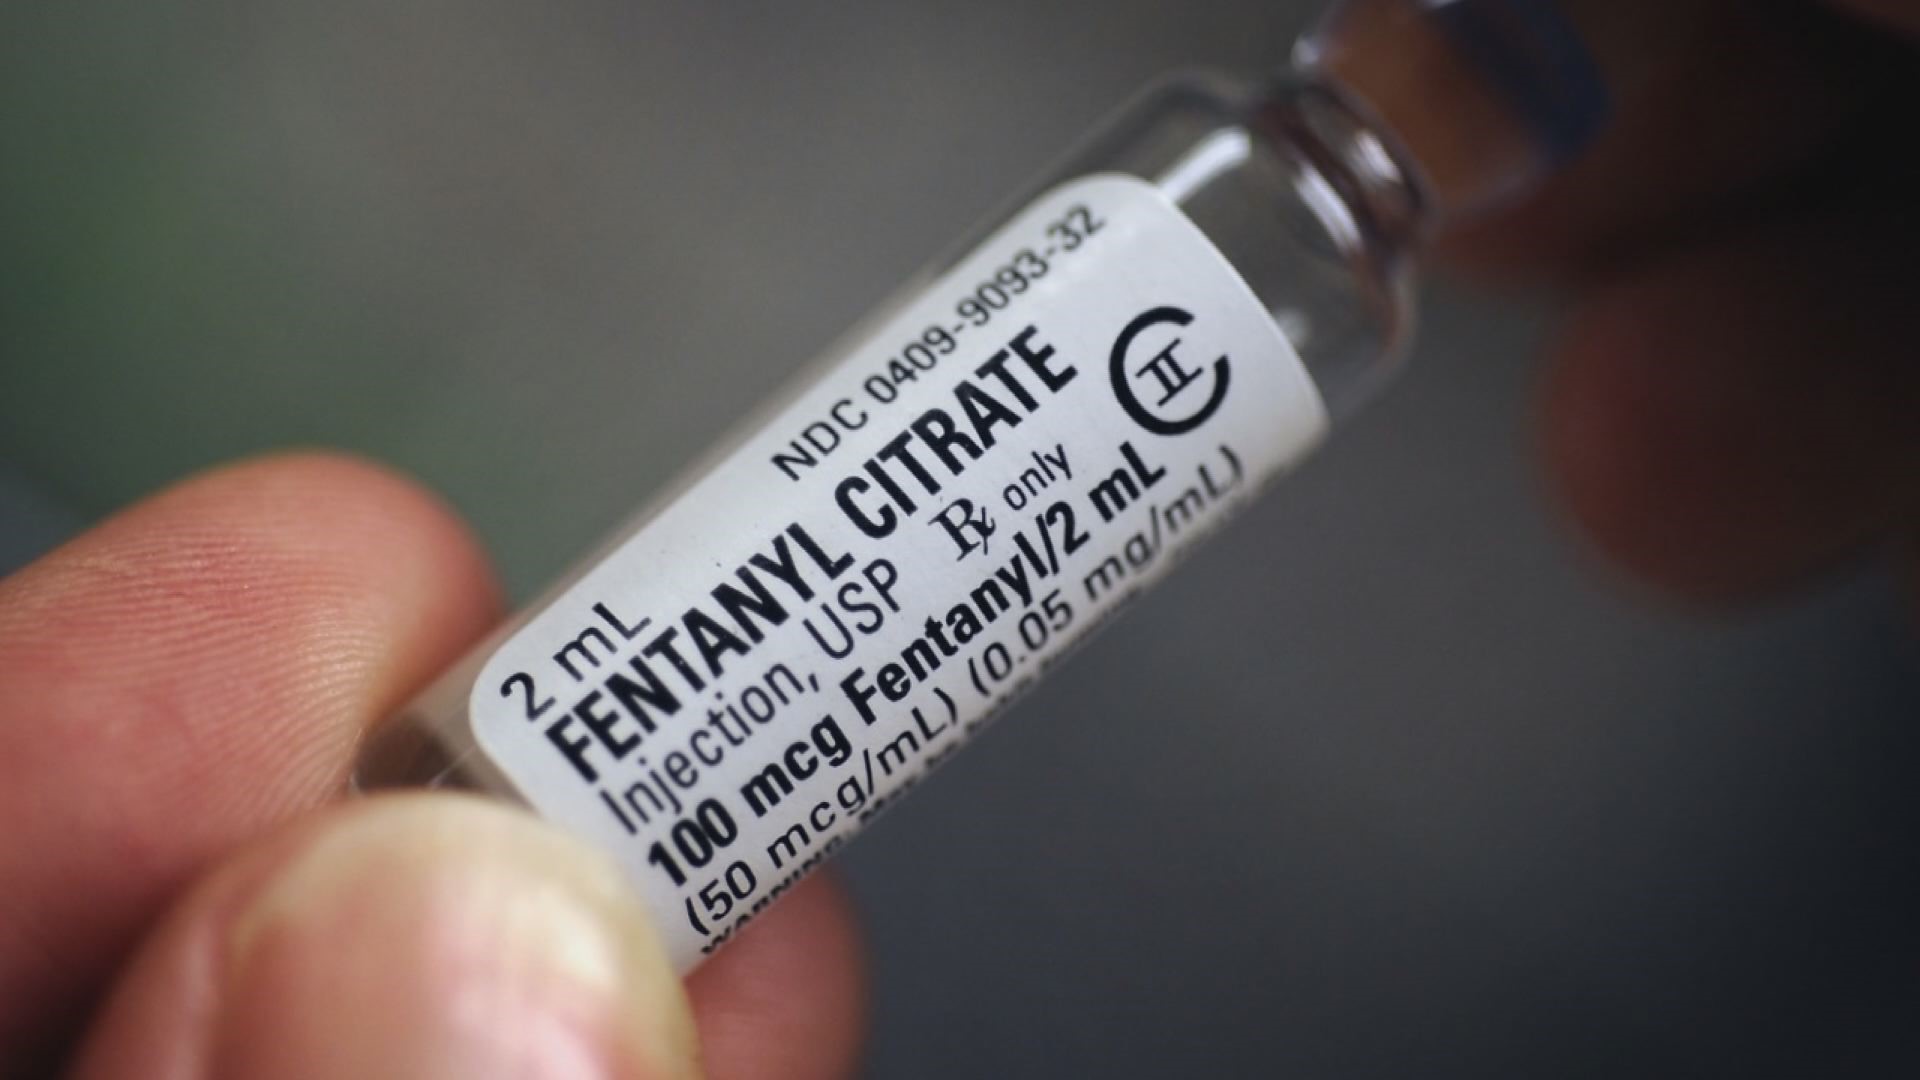 A non-profit is making the public aware of what signs to look out for to protect loved ones from a fentanyl overdose.